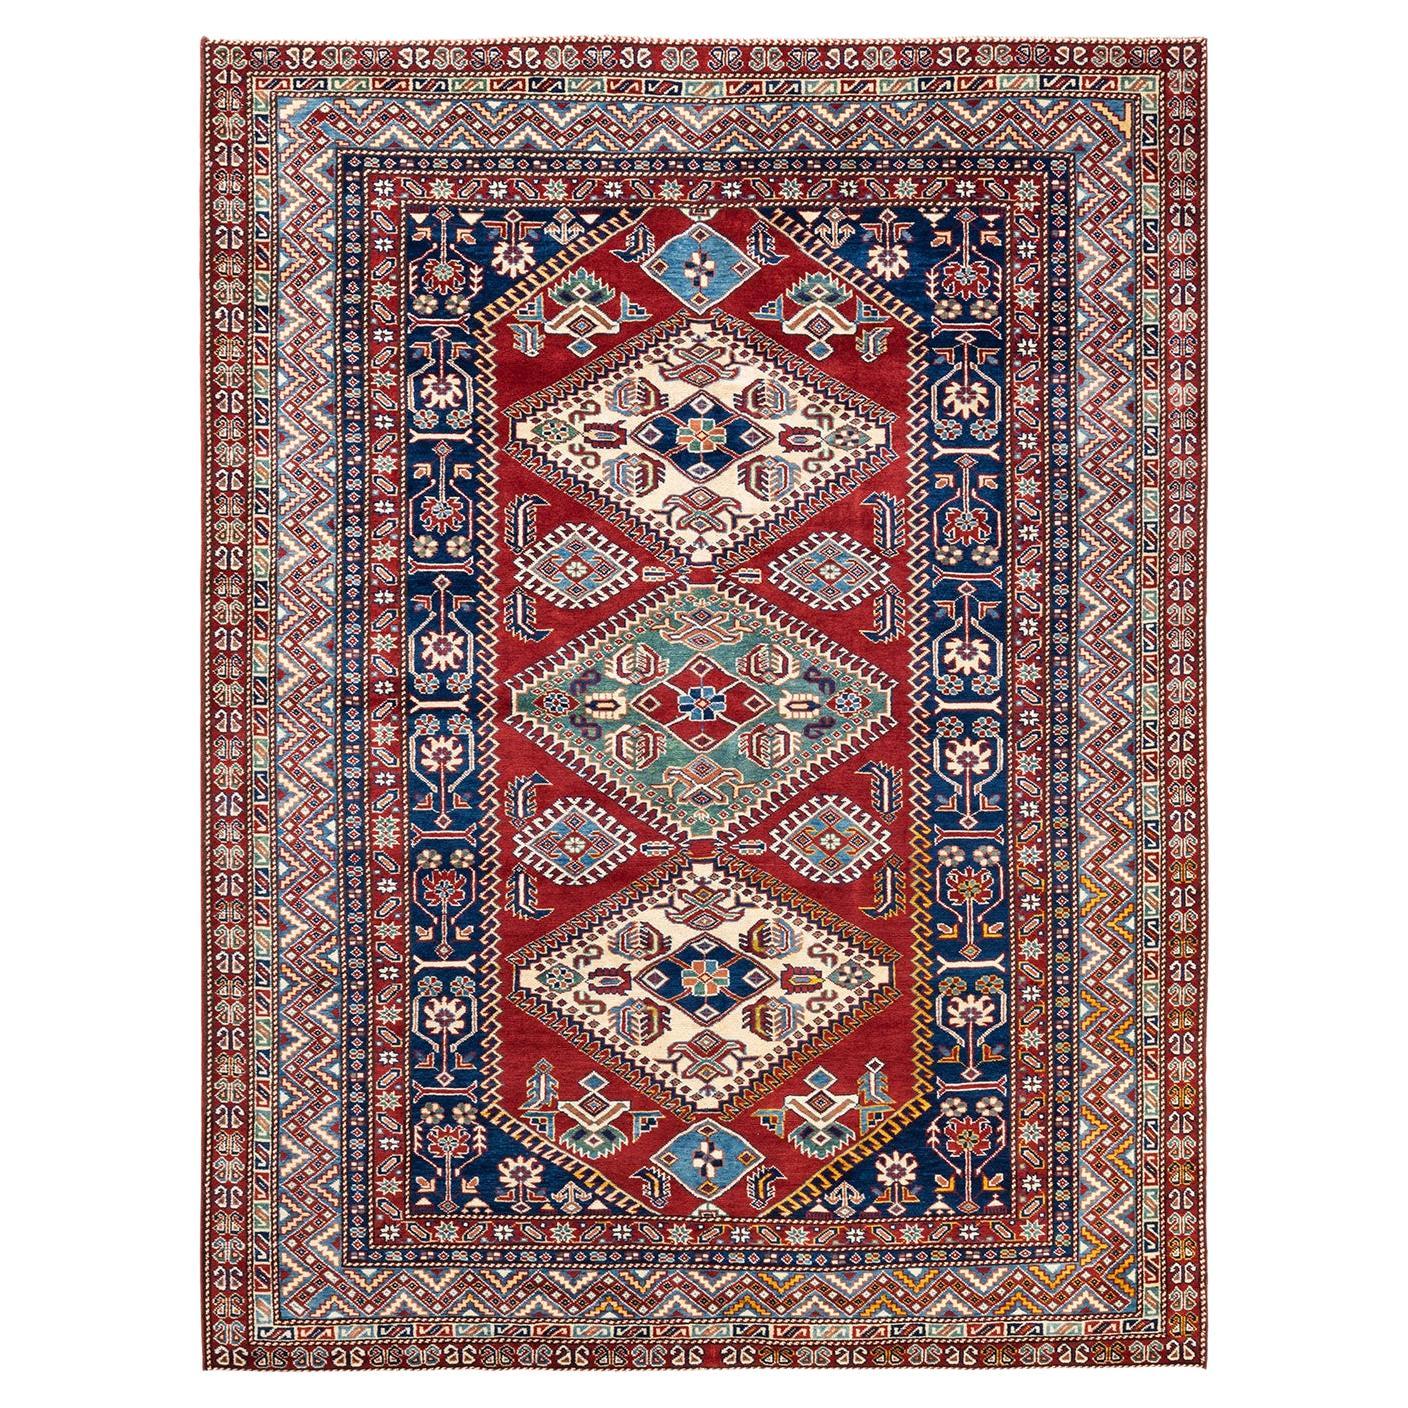 One-of-a-kind Hand Knotted Bohemian Oriental Tribal Red Area Rug